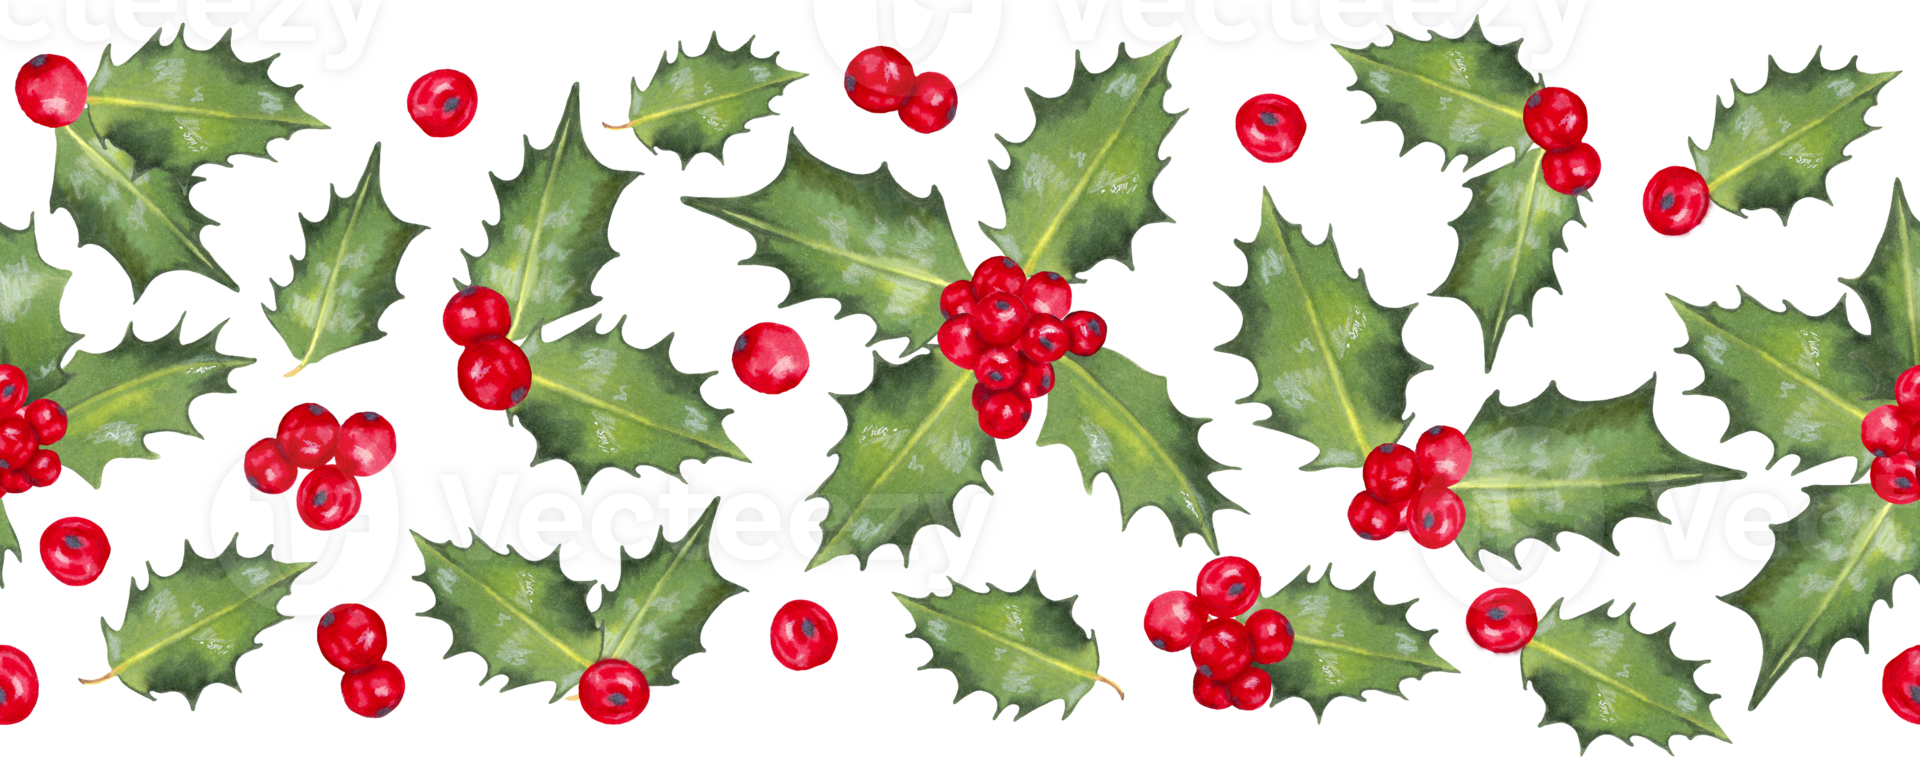 Christmas seamless horizontal border, frame of winter holly flowers, sorbus branches. Decor for the New Year, Christmas and seasonal holidays. Merry Christmas holiday design.Handmade isolated art. png